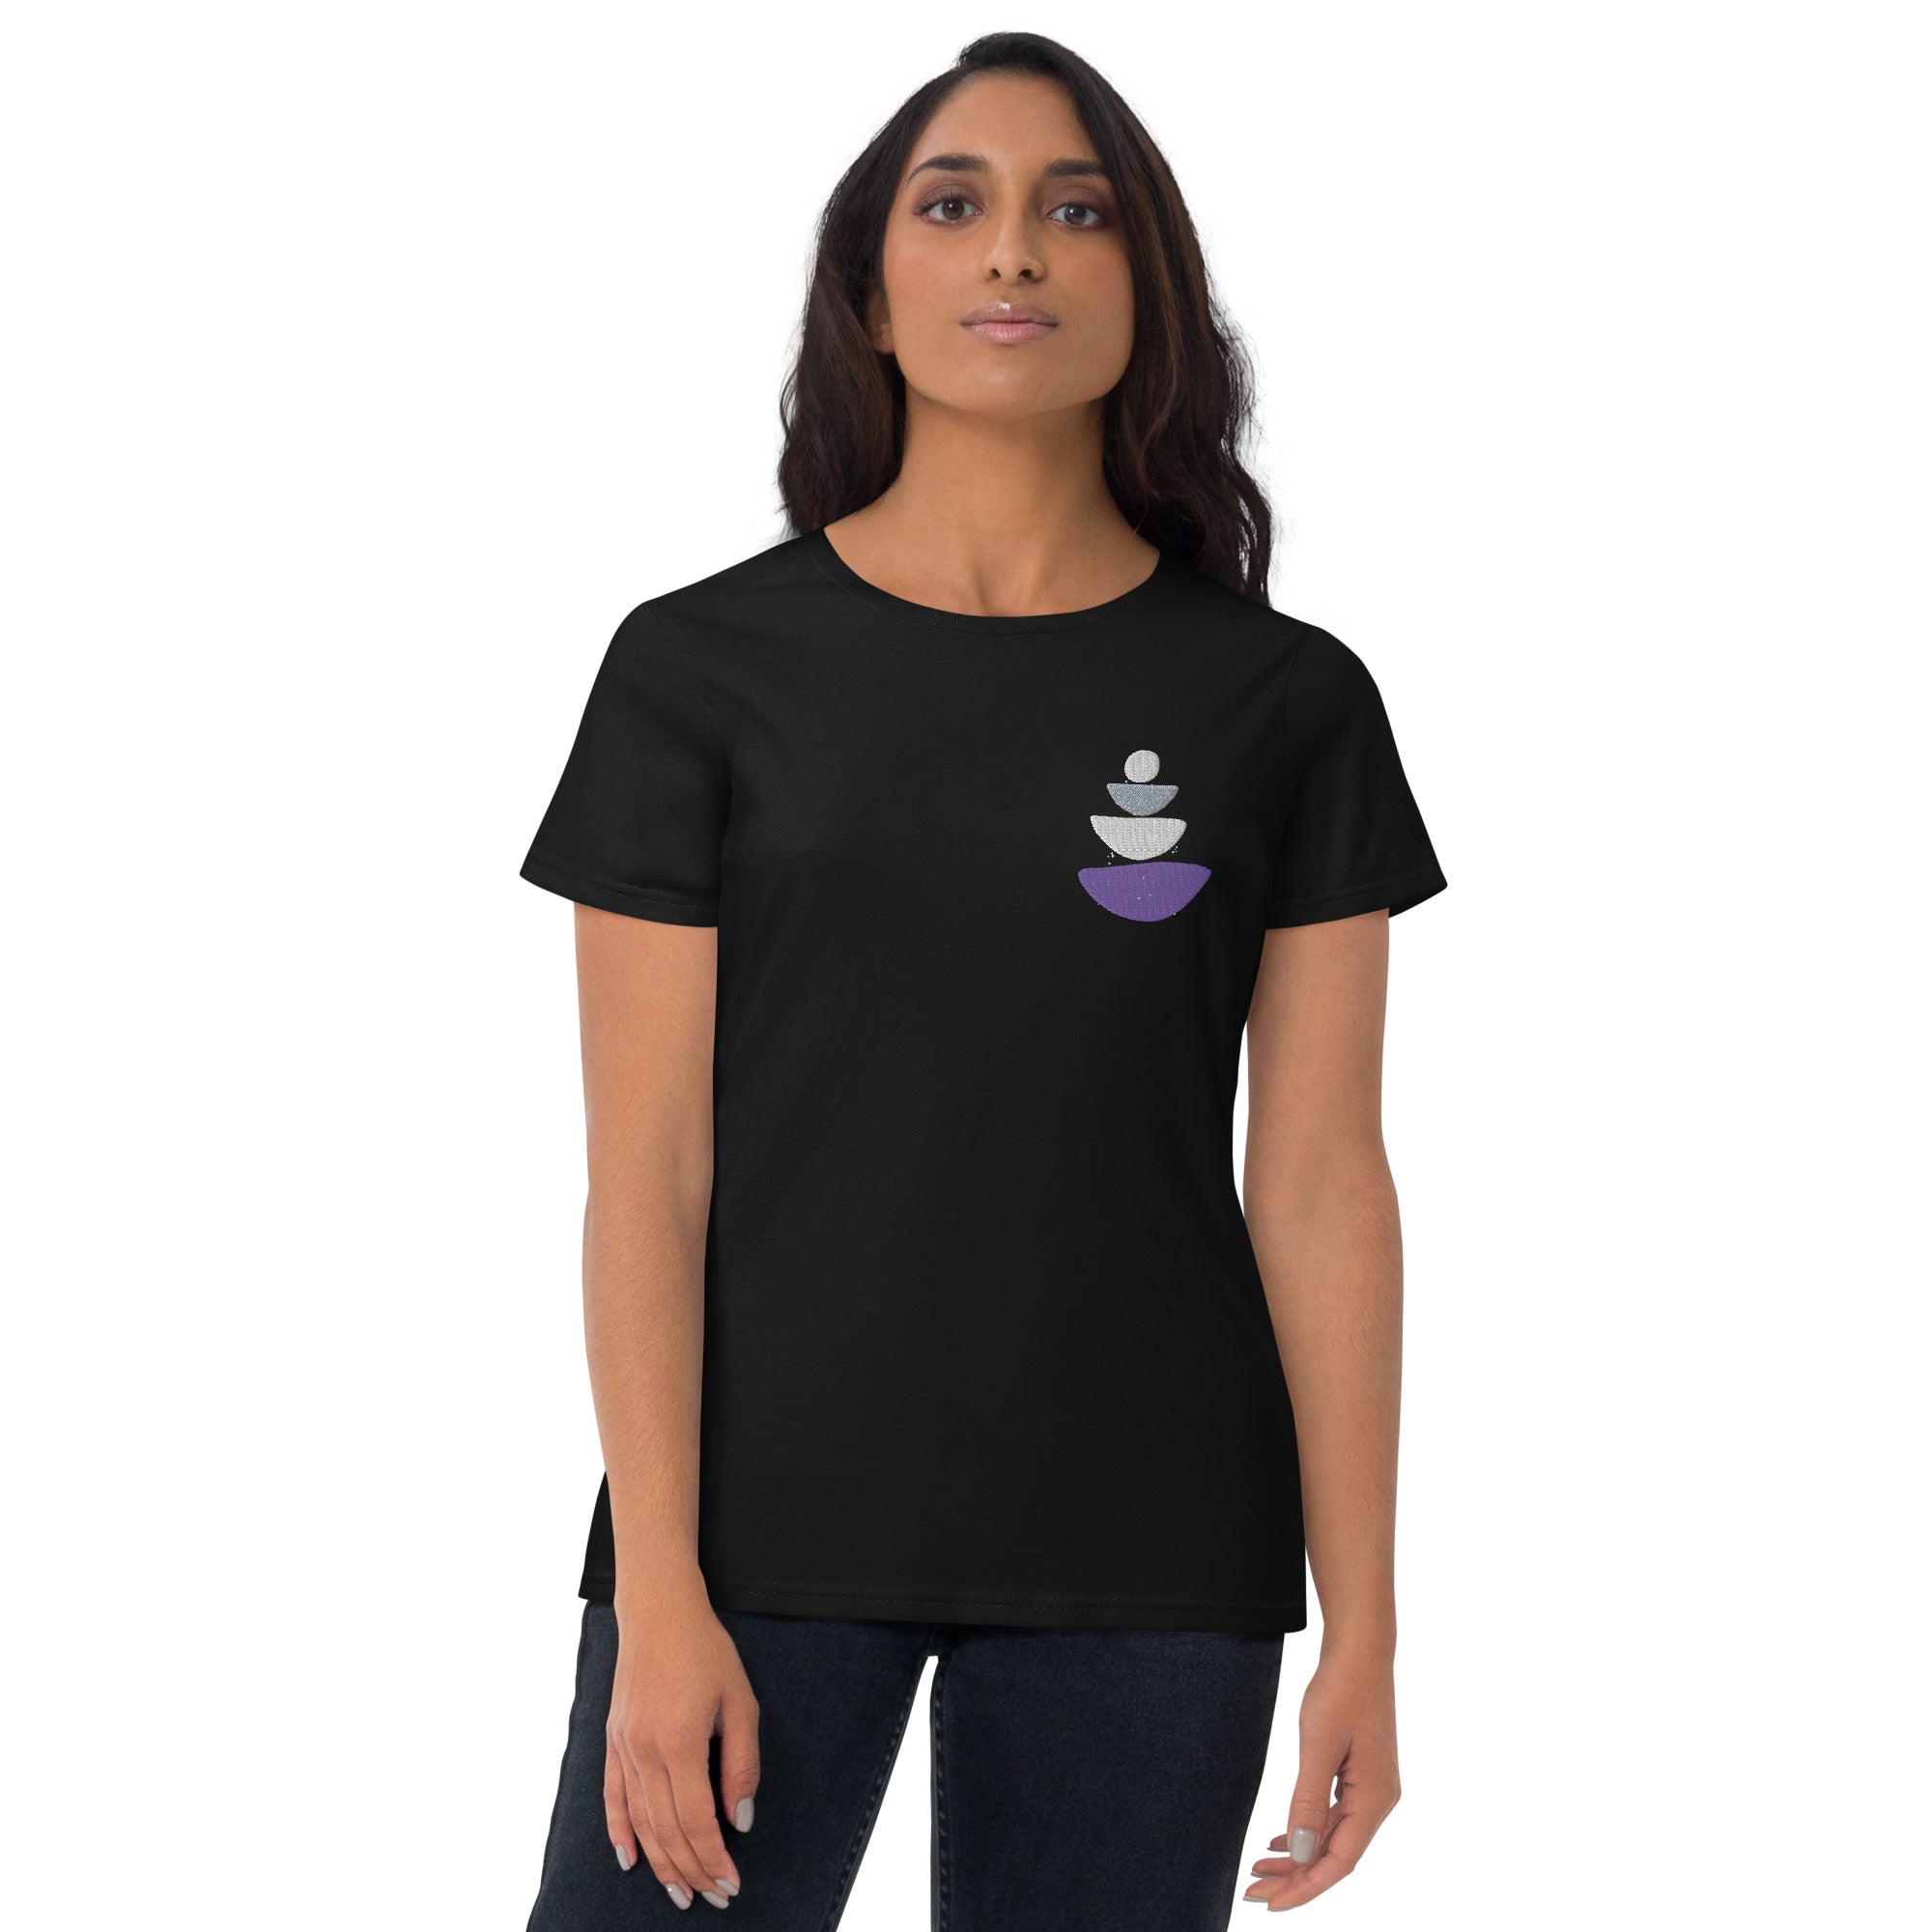 Women's Cotton Short Sleeve Yoga T-shirt - Balanced Sign - Personal Hour for Yoga and Meditations 